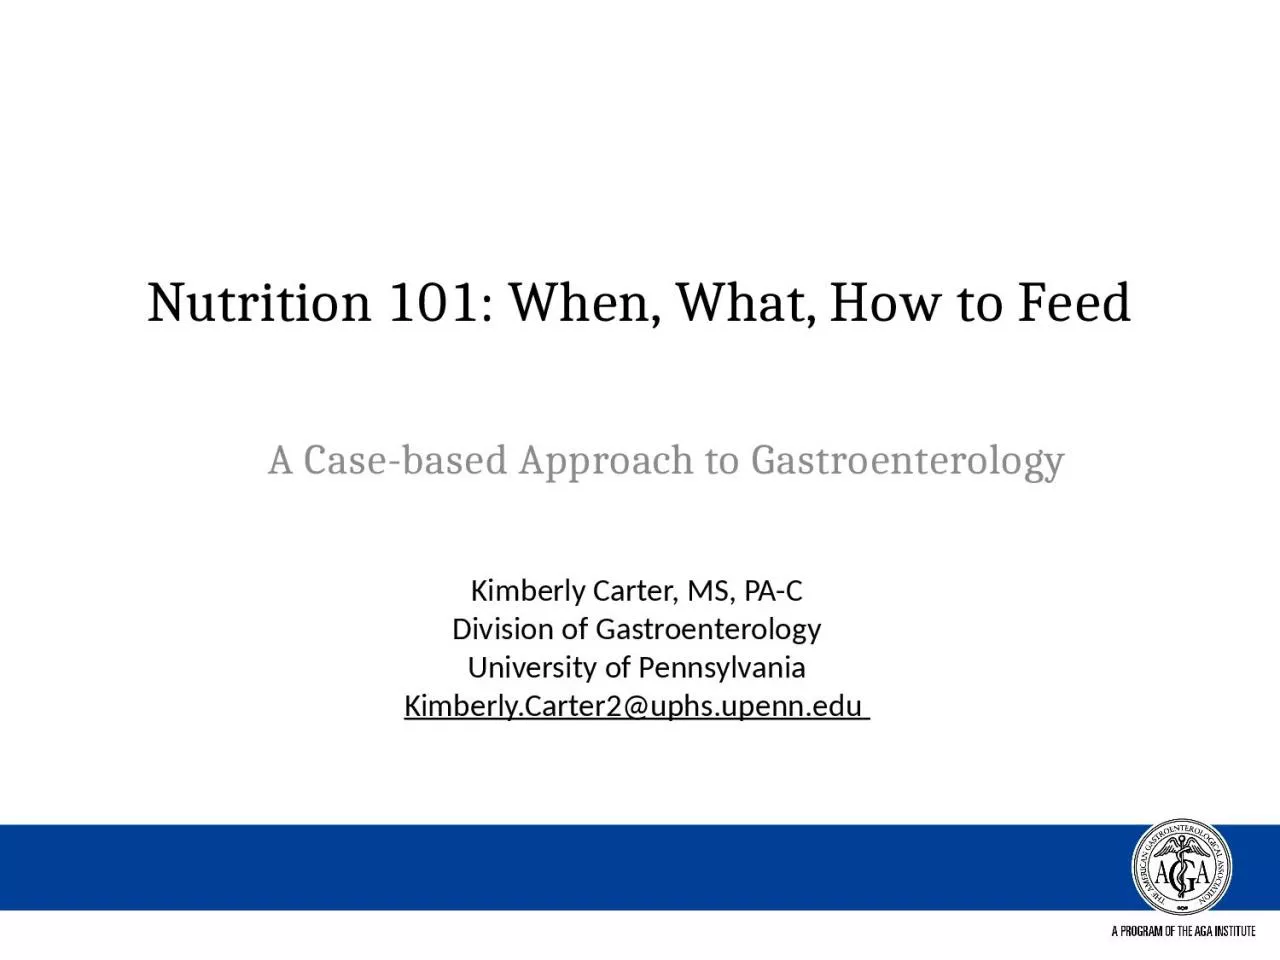 Nutrition 101: When, What, How to Feed